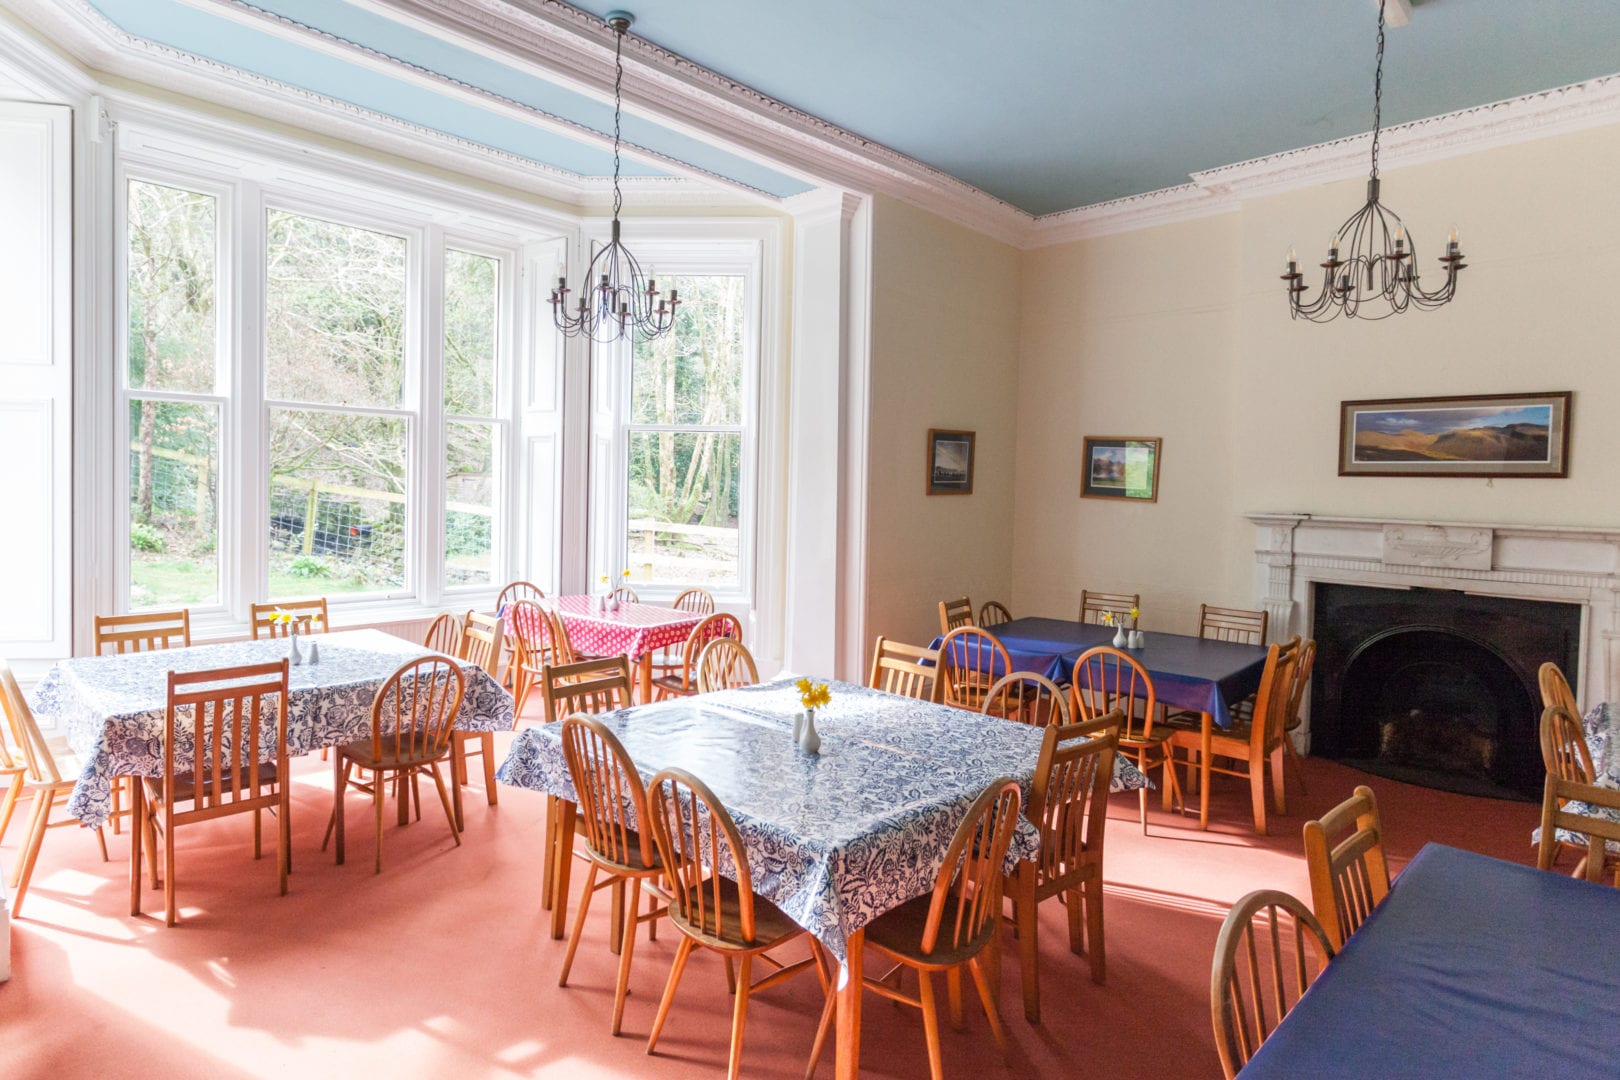 derwentwater dining room ideal for Christmas lunch